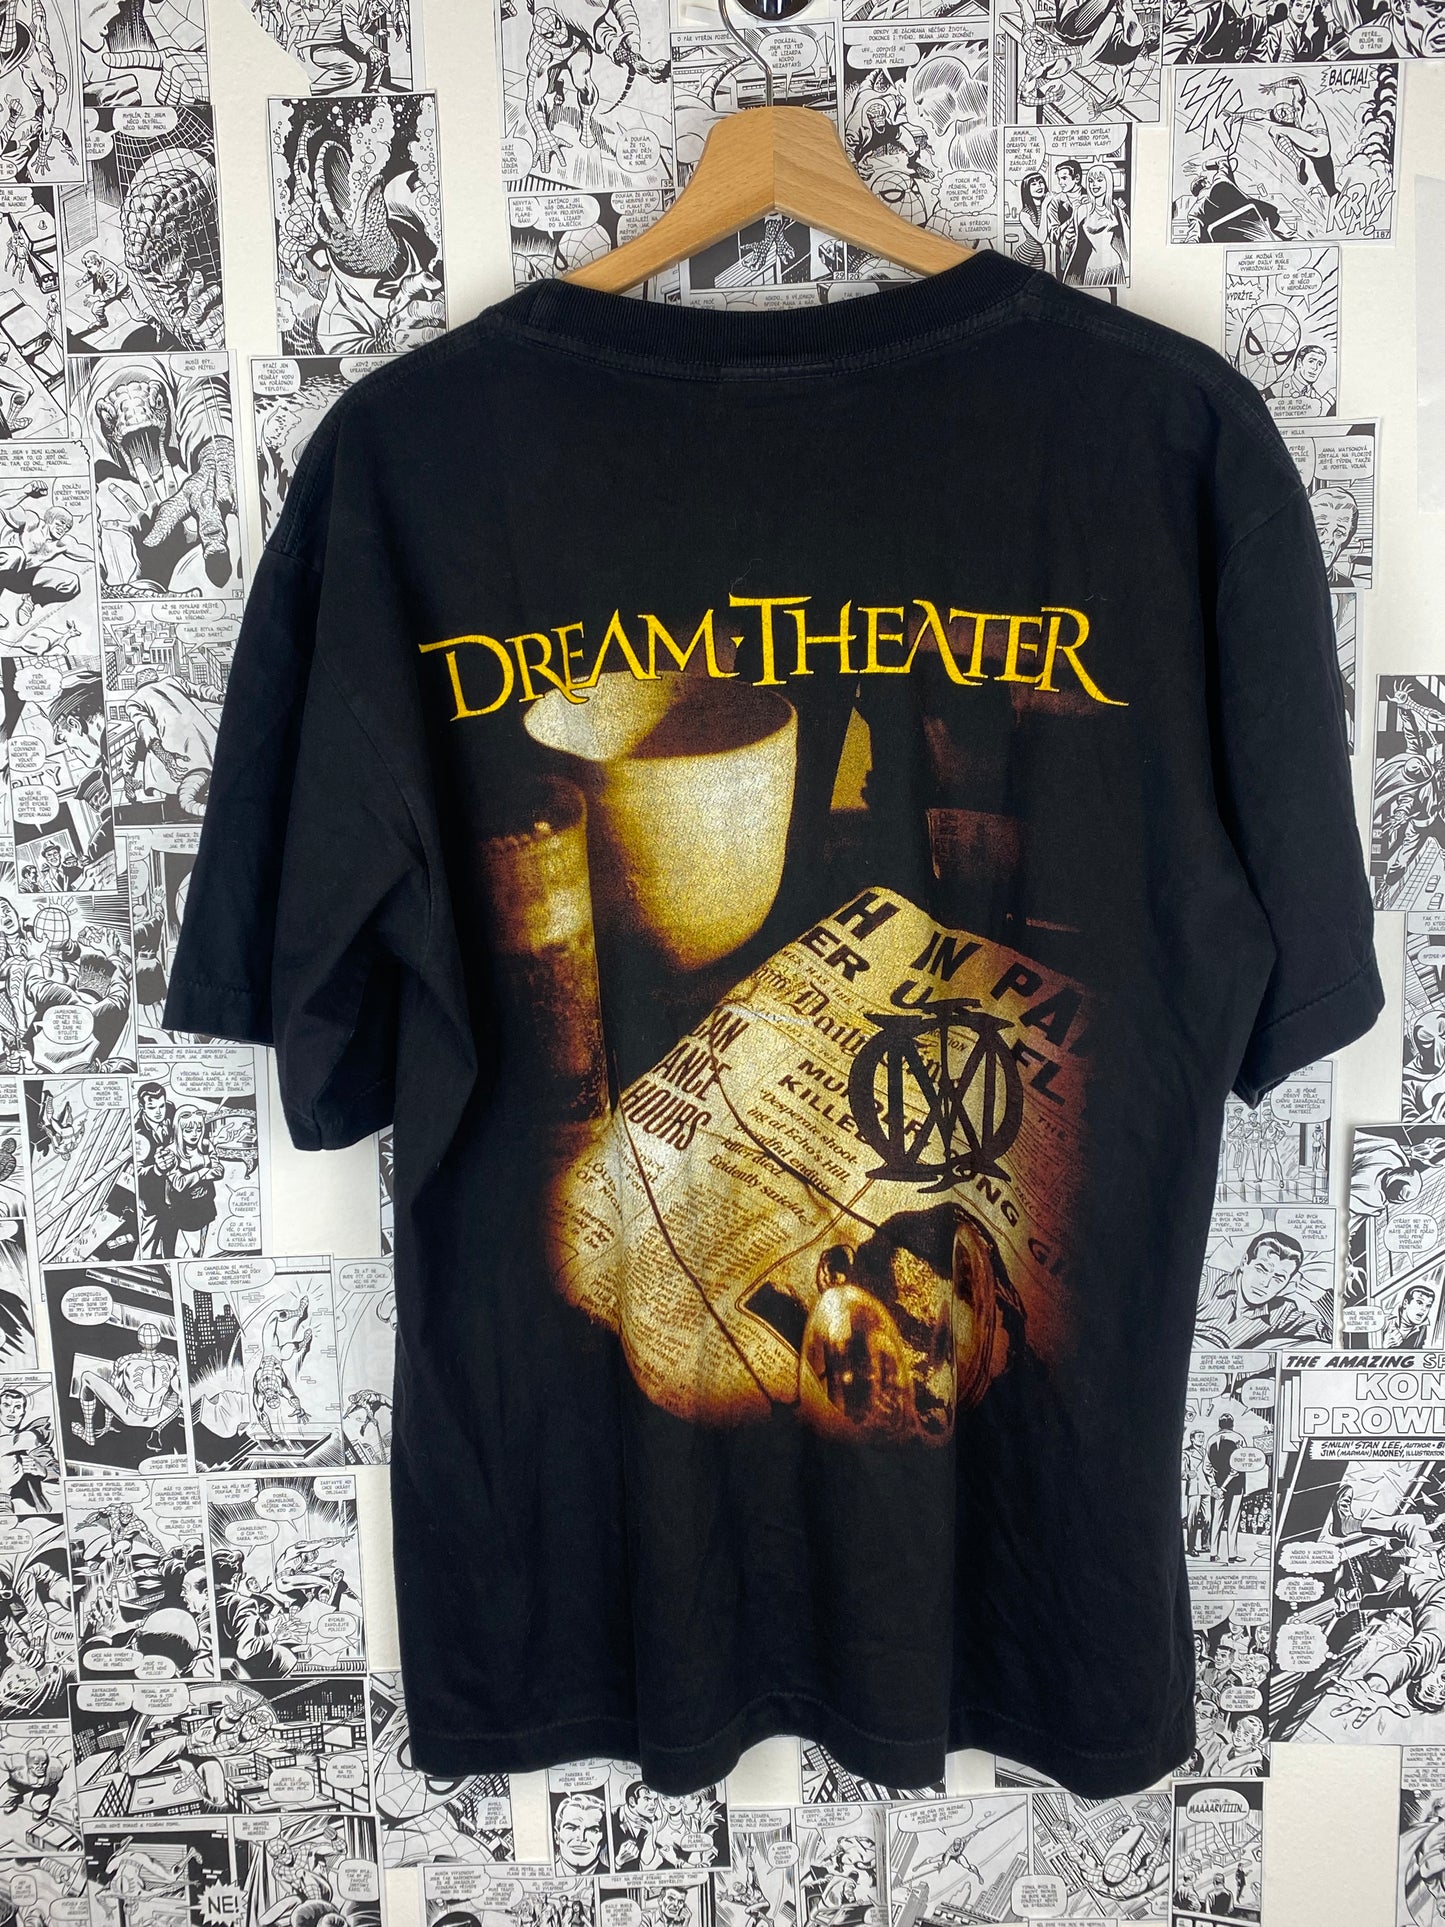 Vintage Dream-Theater “Scenes from a memory” - t-shirt - size L